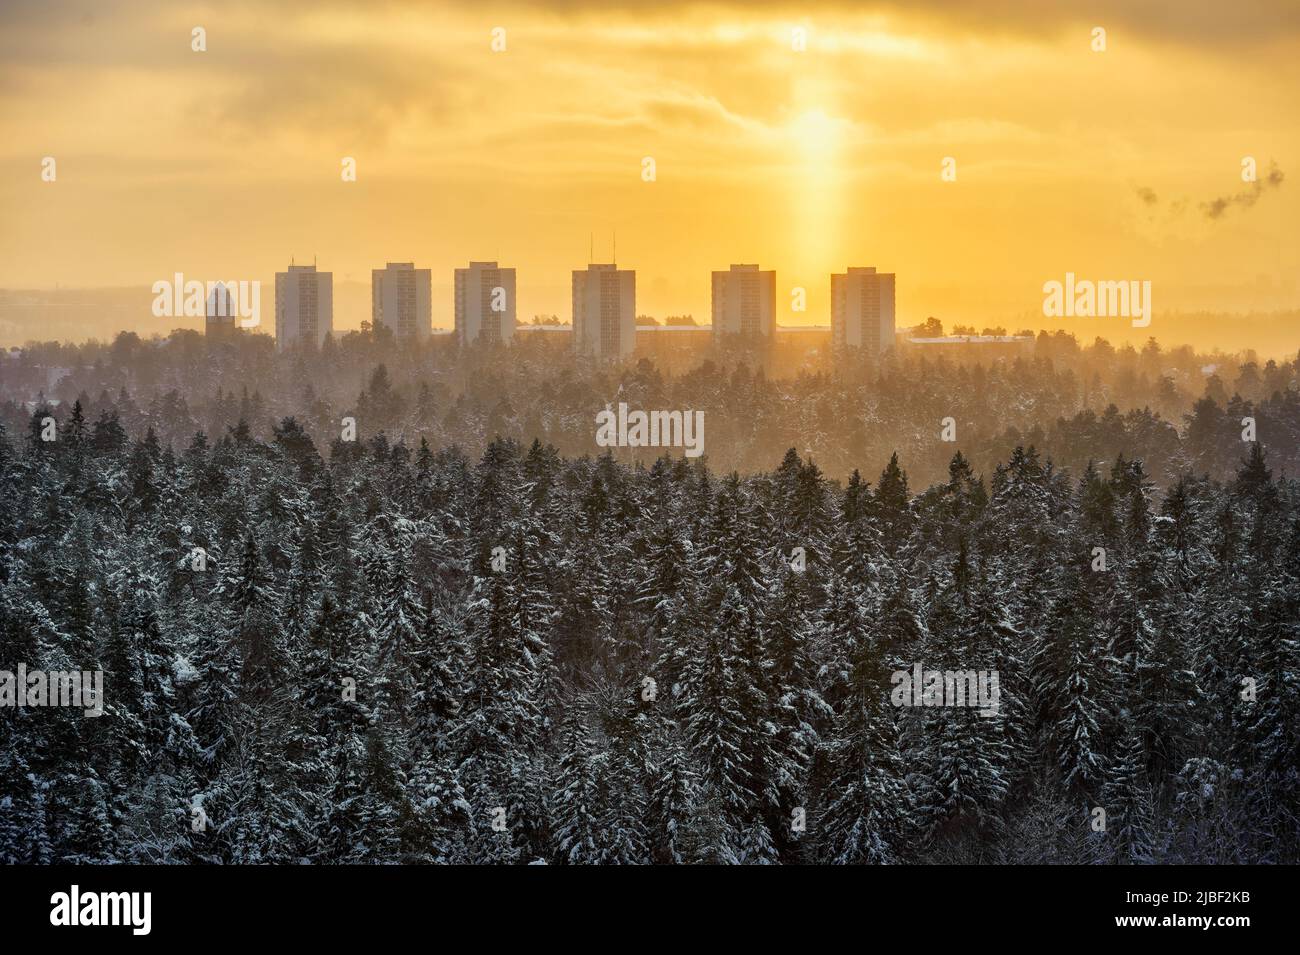 Snow covered forest by apartment buildings at sunset in Lidingo, Sweden Stock Photo